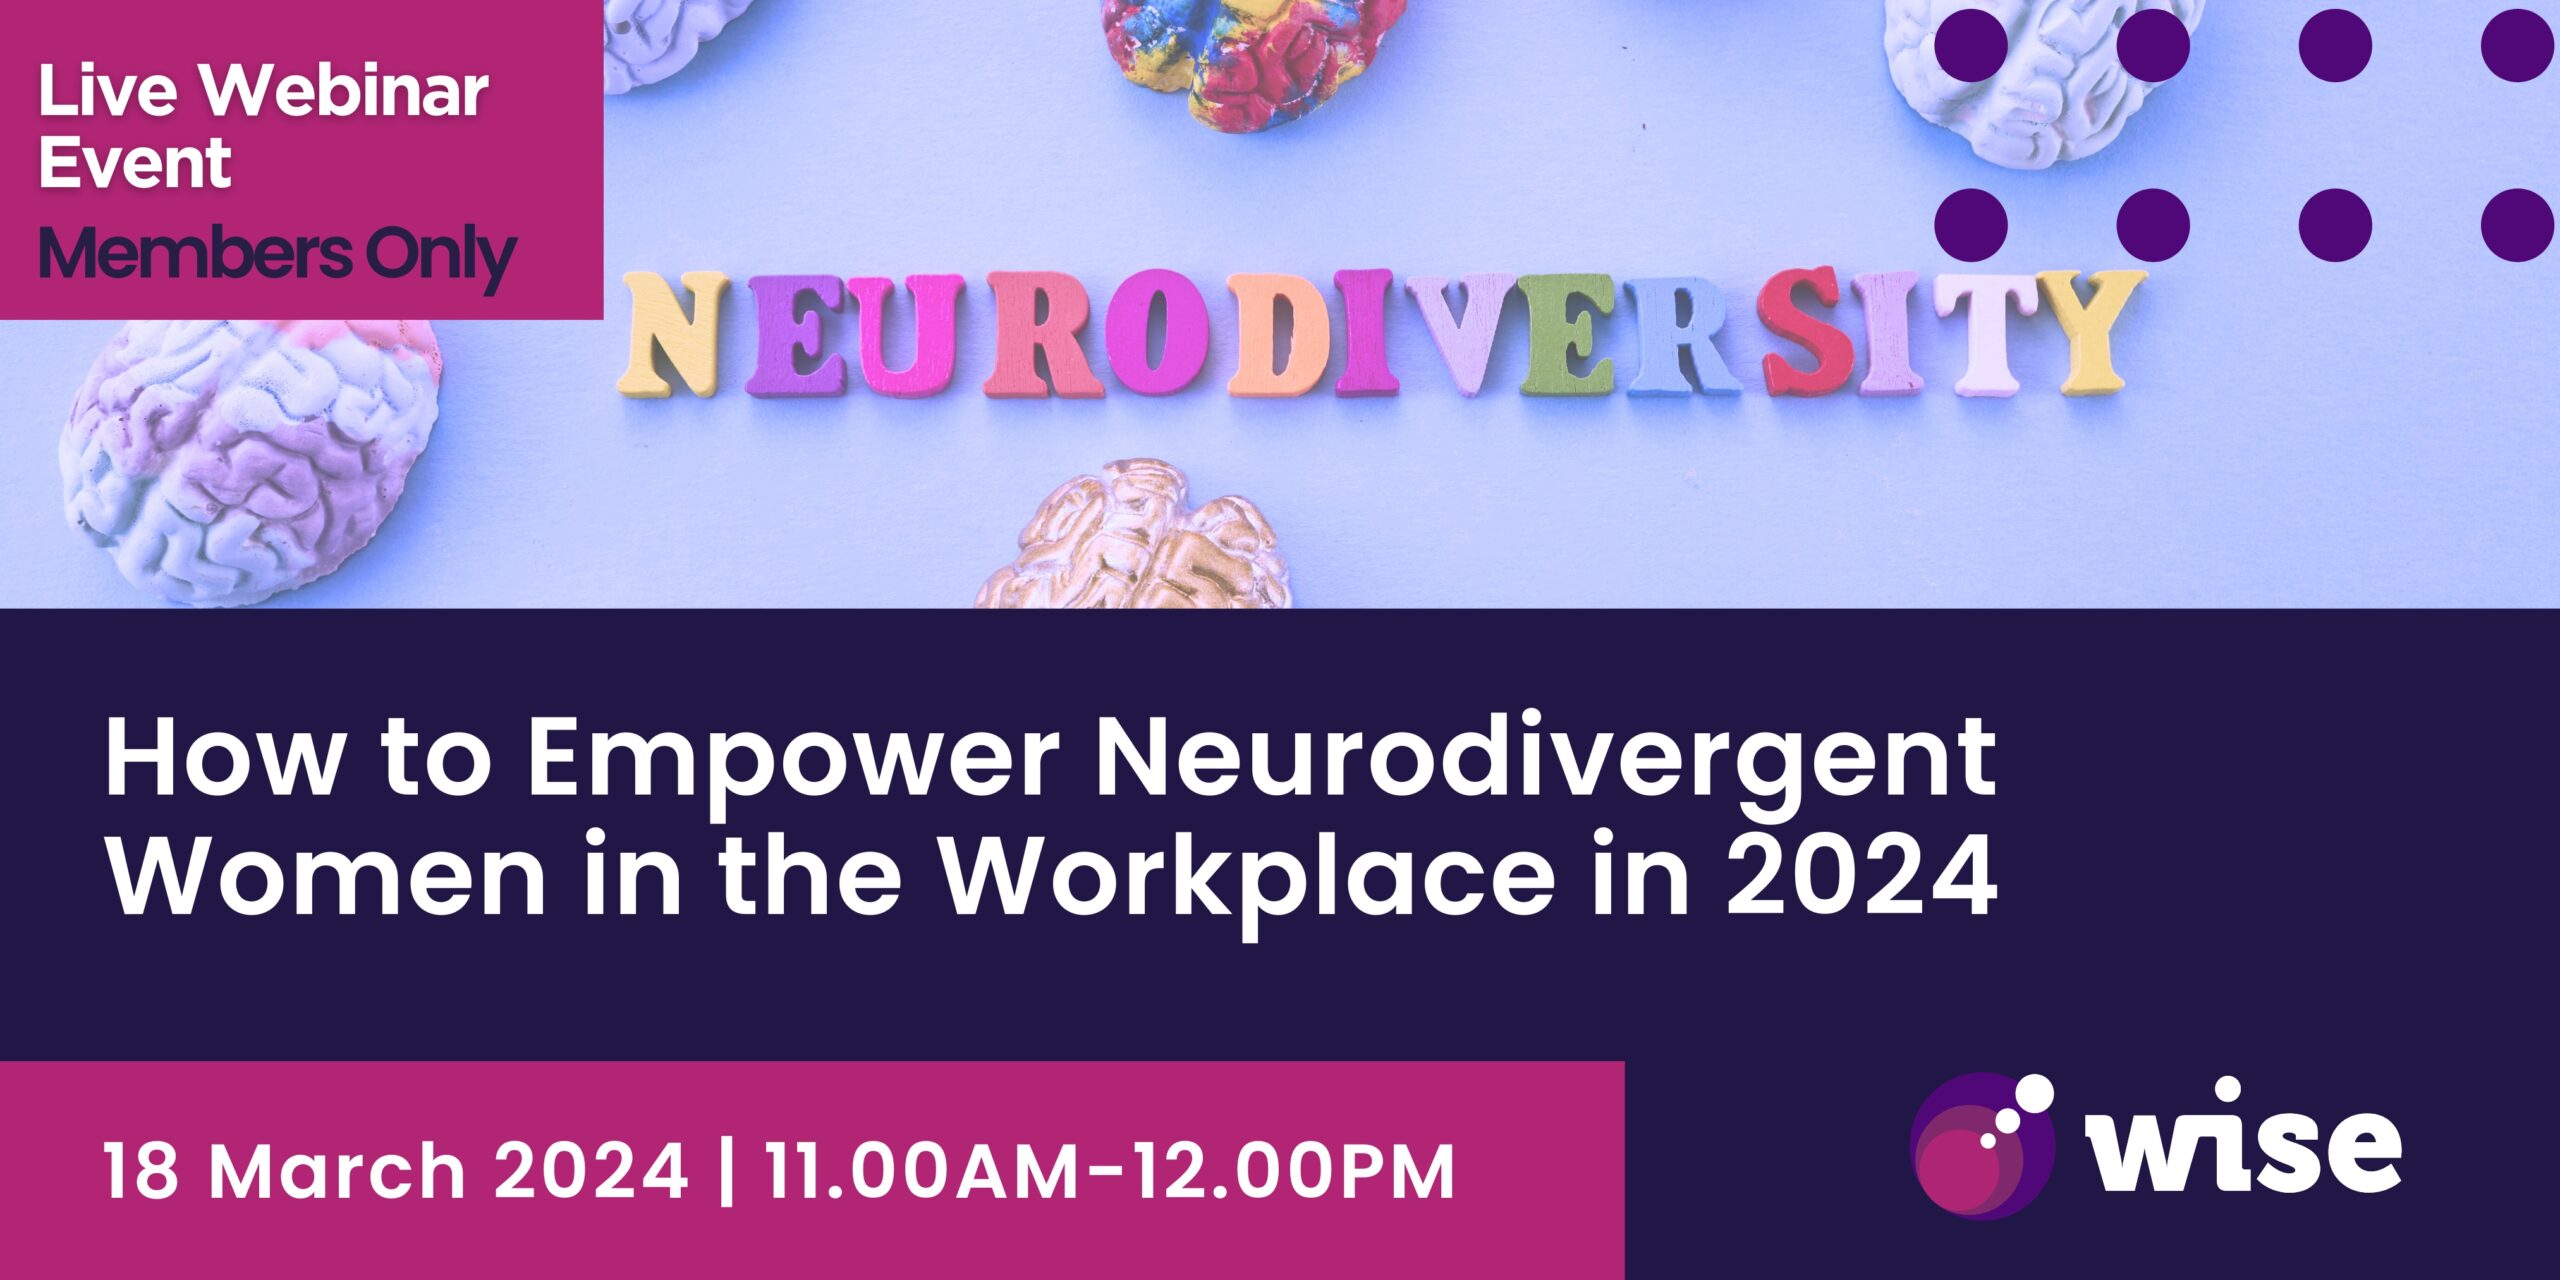 How to Empower Neurodivergent Women in the Workplace in 2024